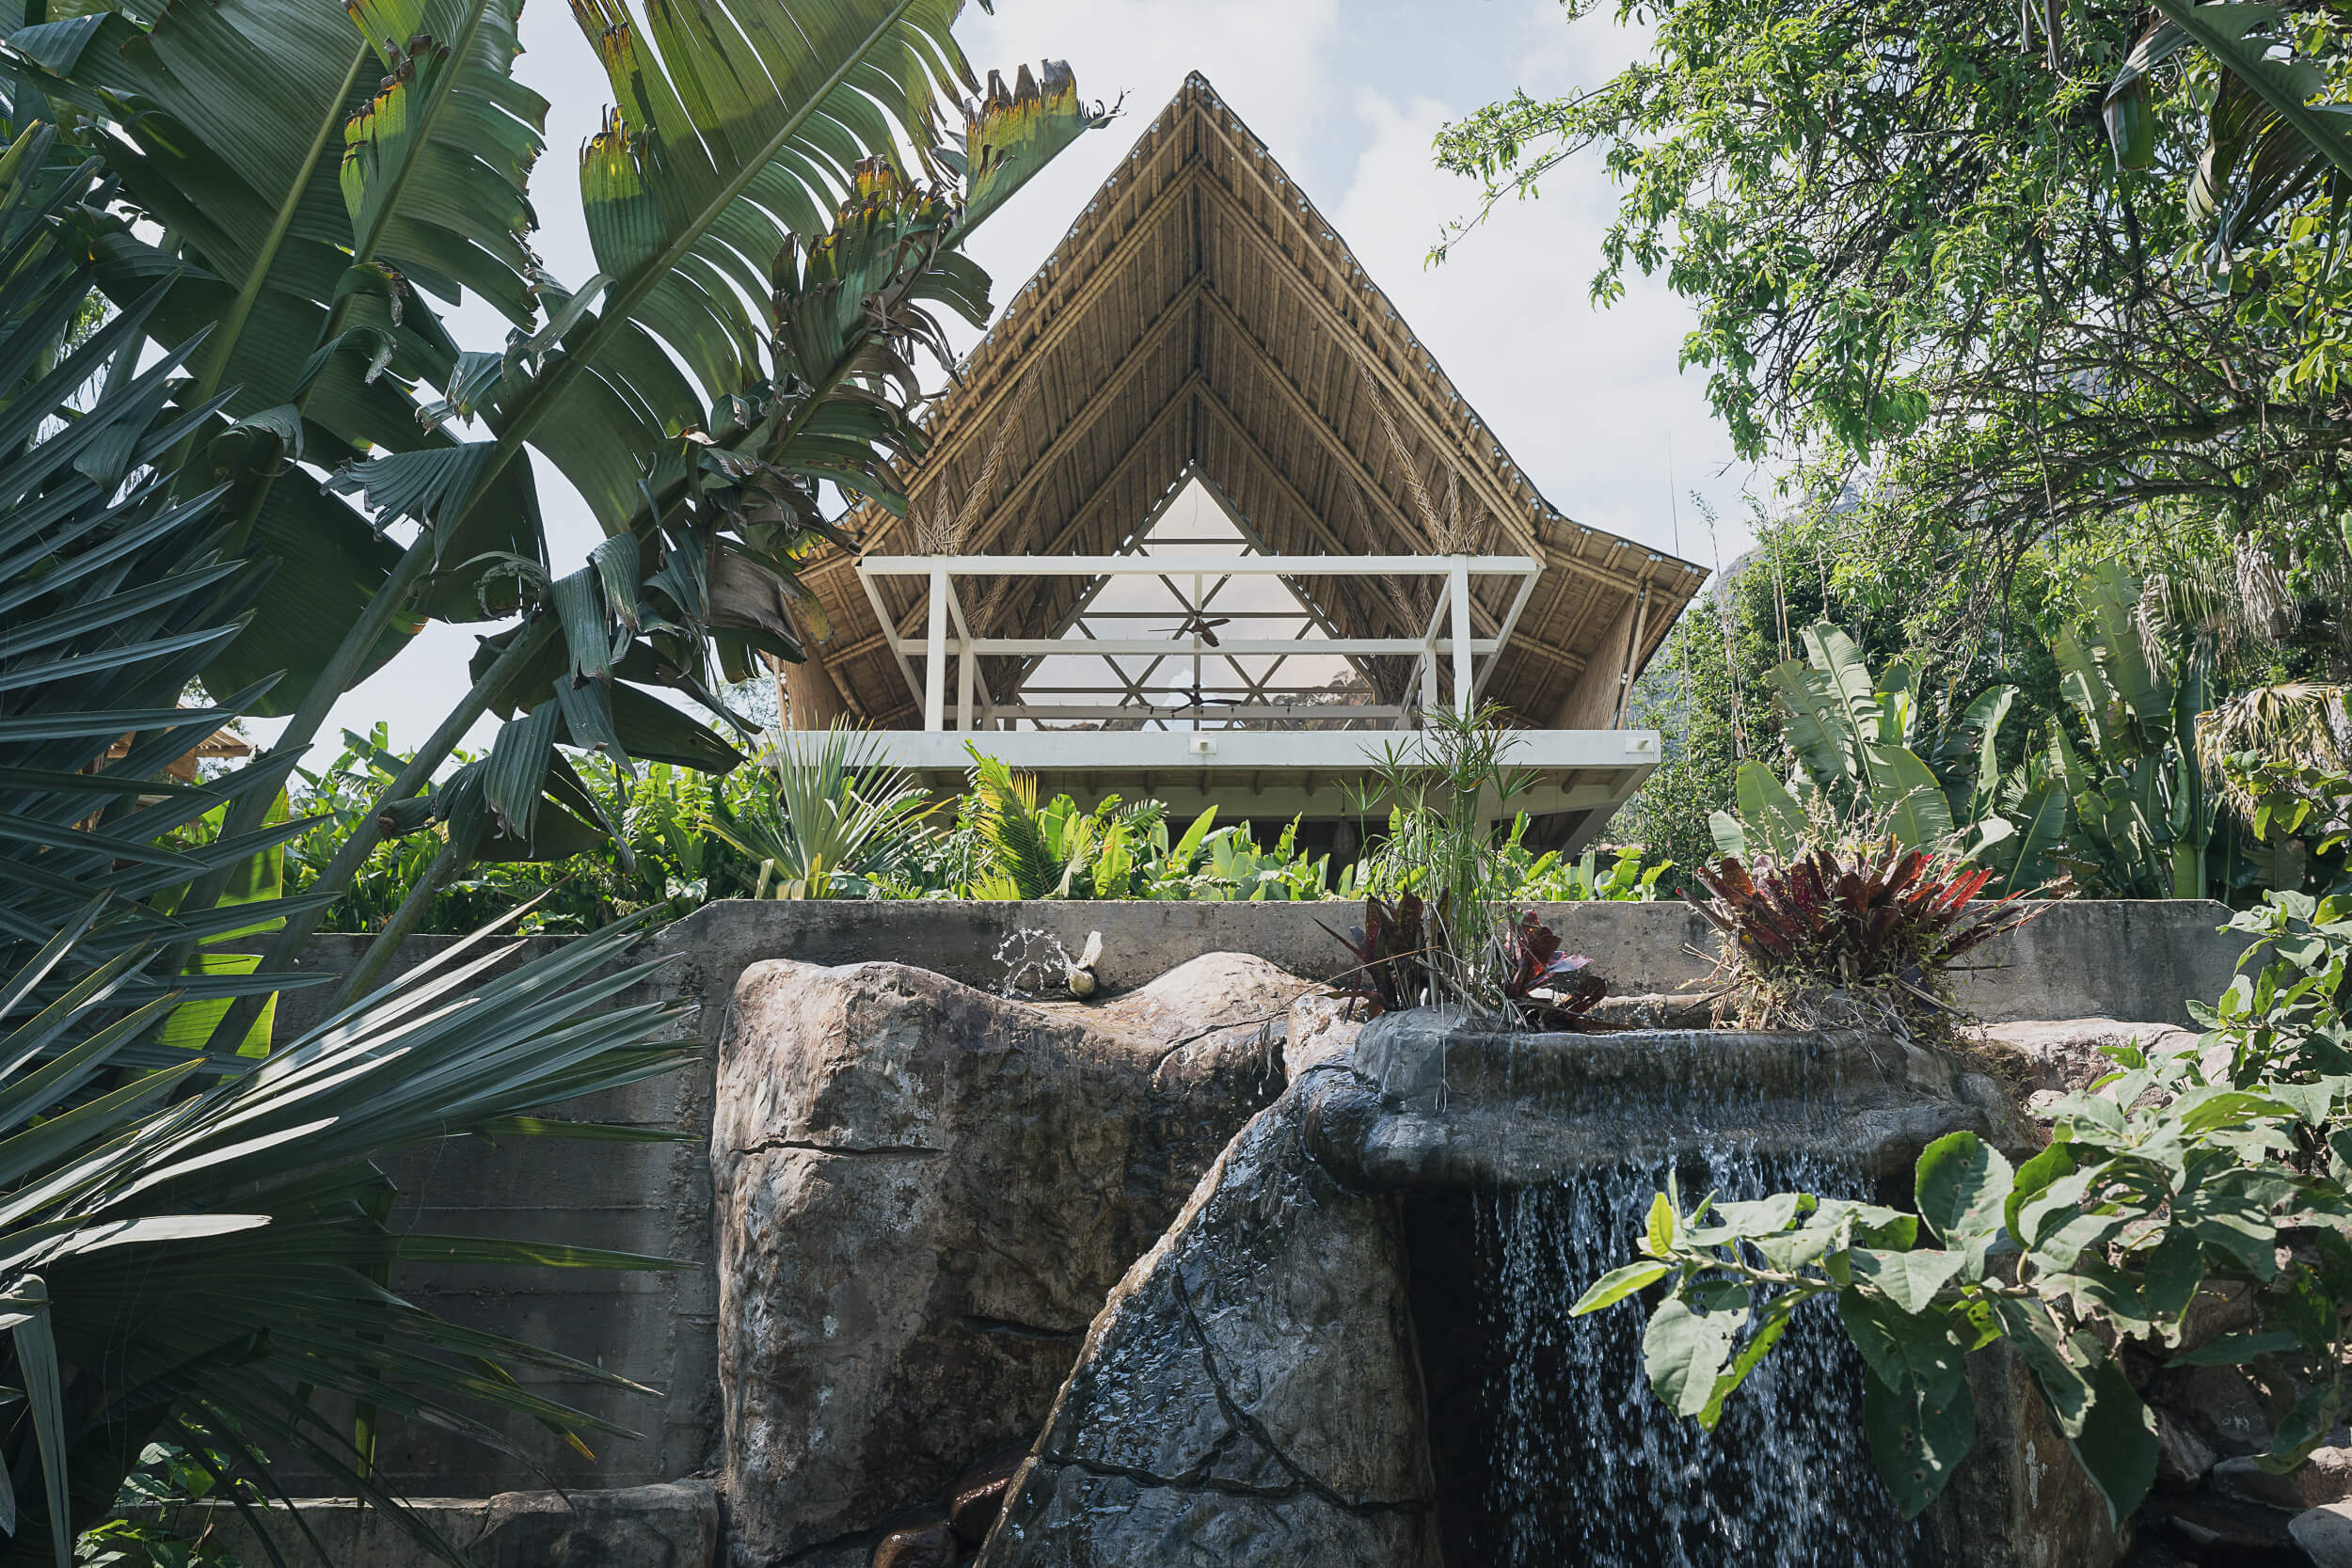 Scenic view of a luxurious, eco-conscious Mexican retreat captured by Matt Anthony Photography, featuring a traditional thatched roof pavilion amid rich tropical foliage with a serene waterfall, exemplifying top-tier lifestyle photography.